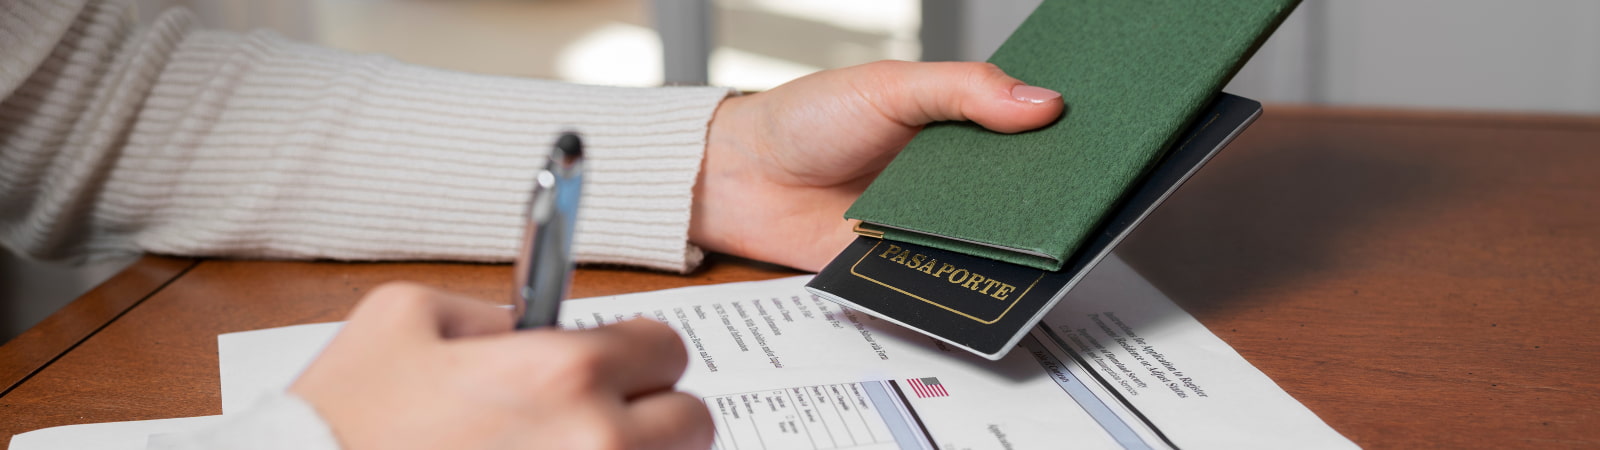 What Are The Short And Long-Term Visa Options Available In The Uae And Qatar